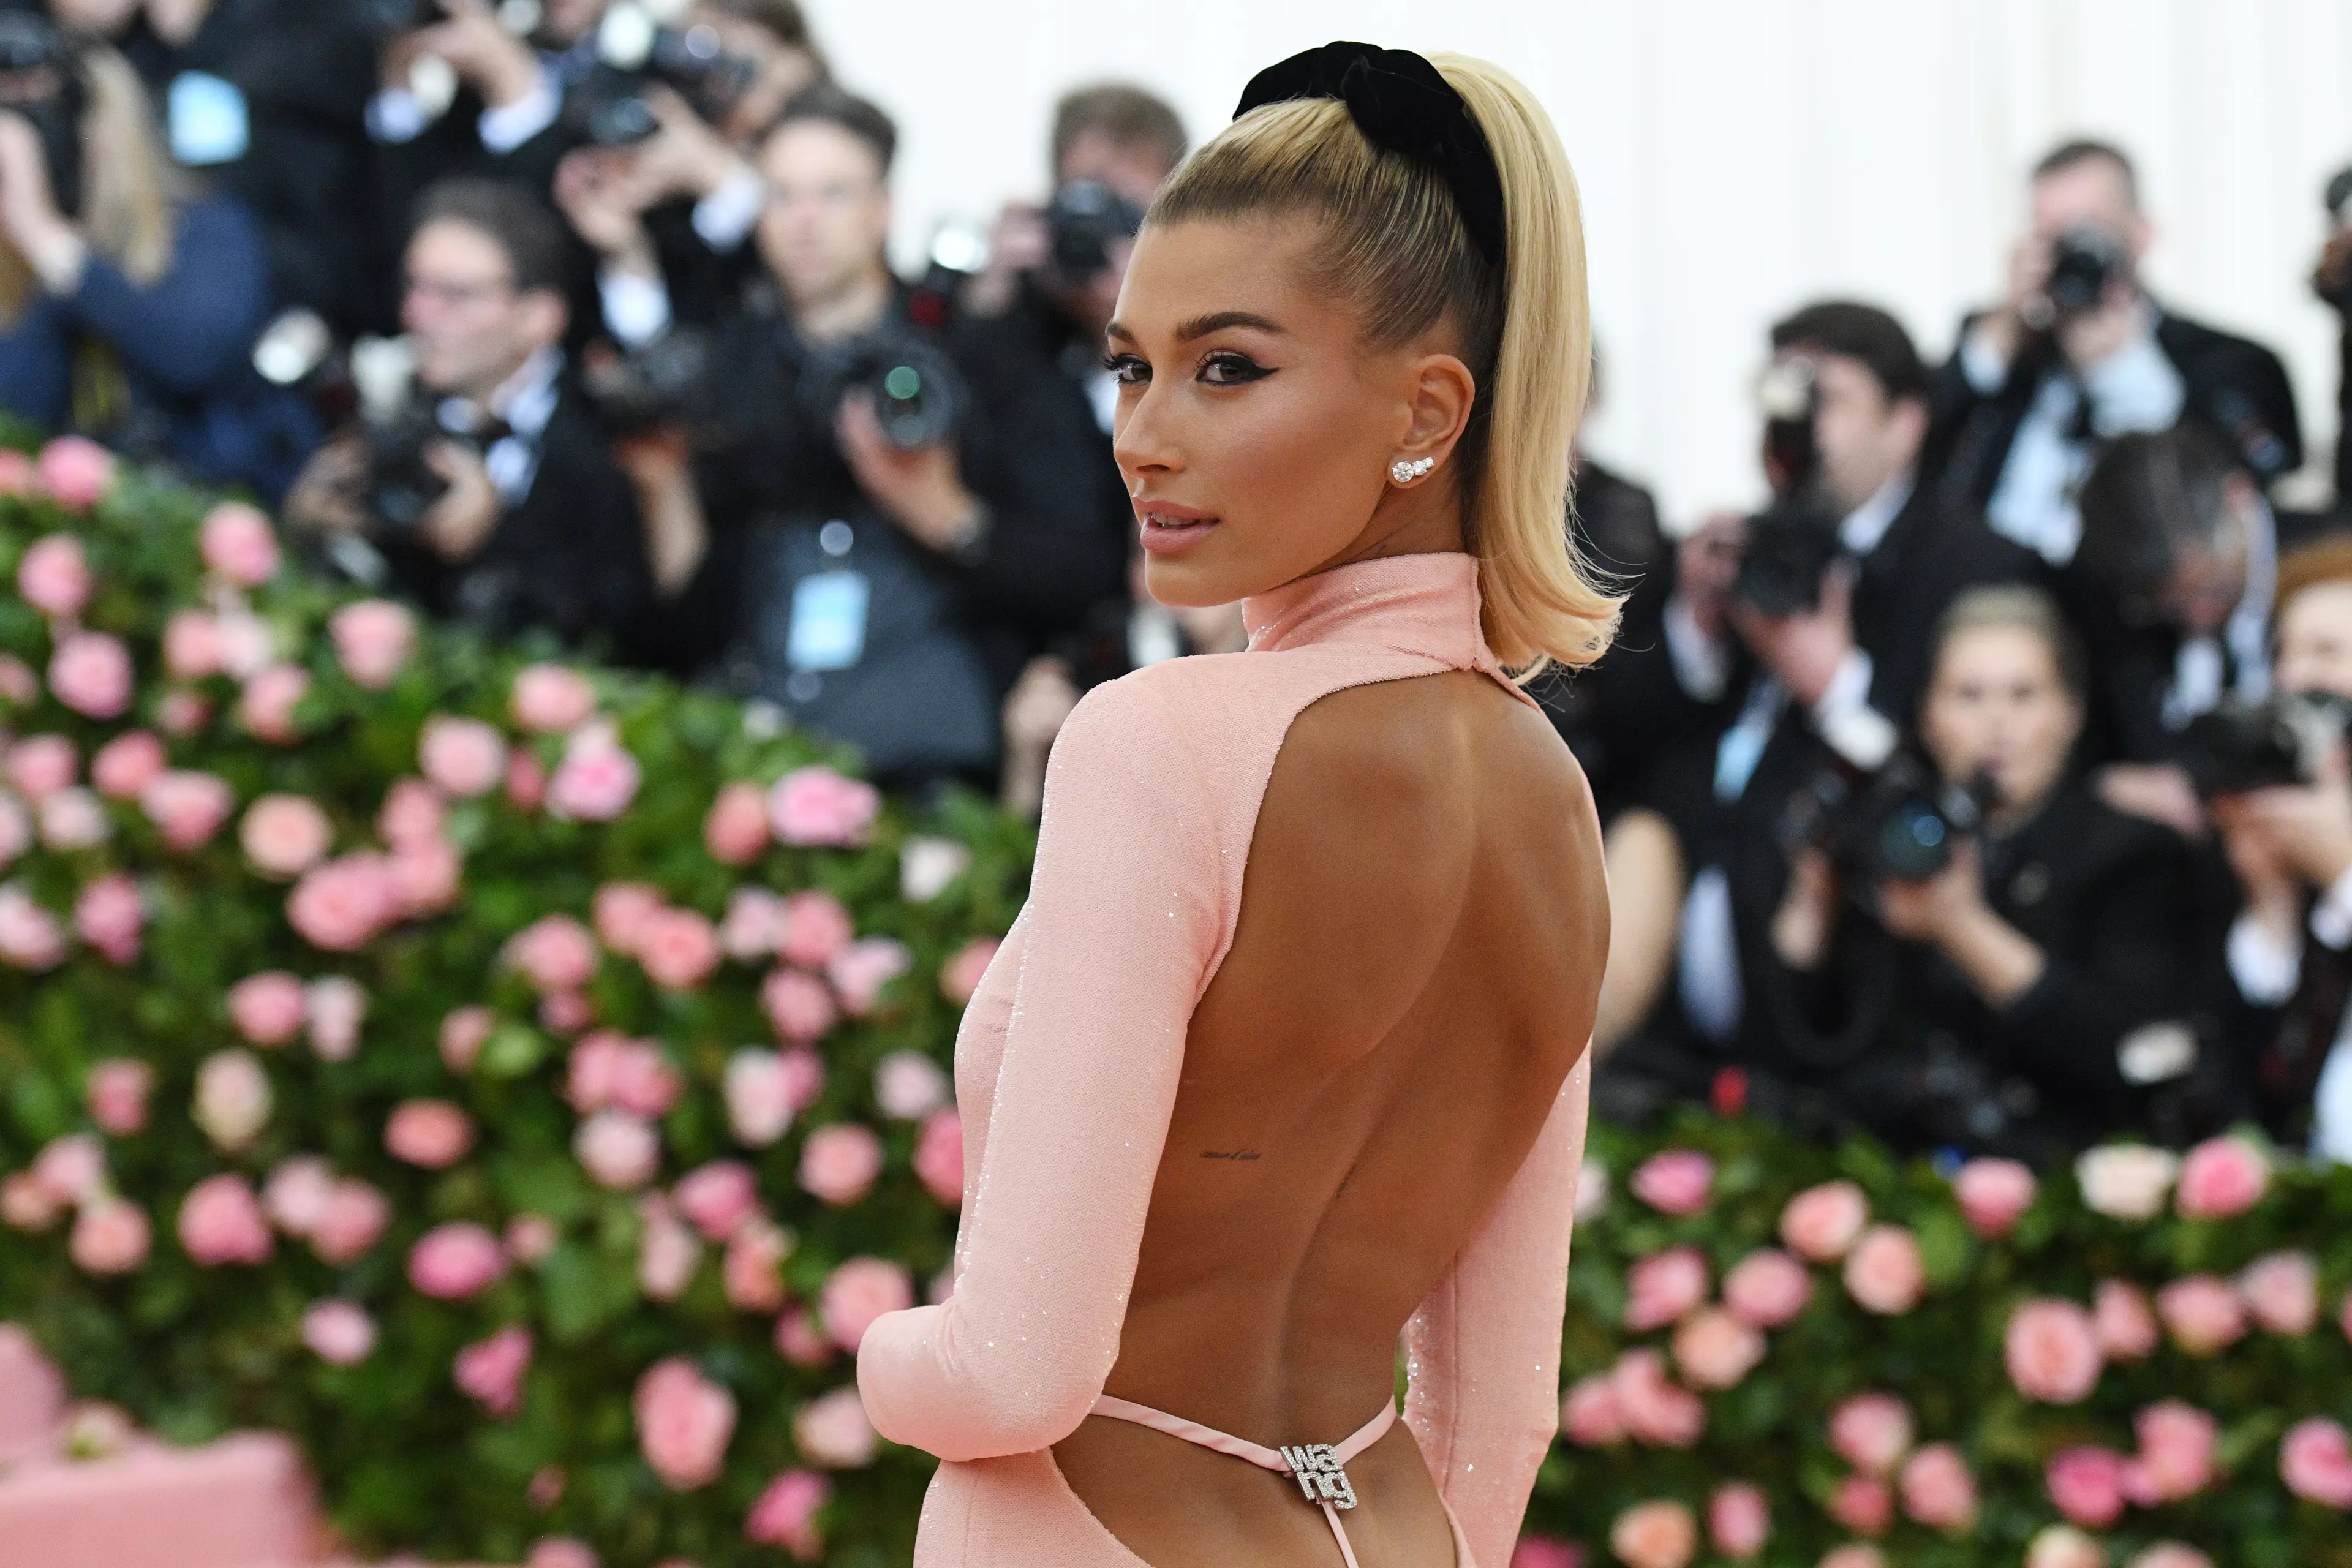 Hailey Bieber walked the red carpet at the 2019 Met Gala in a dress by Alexander Wang (